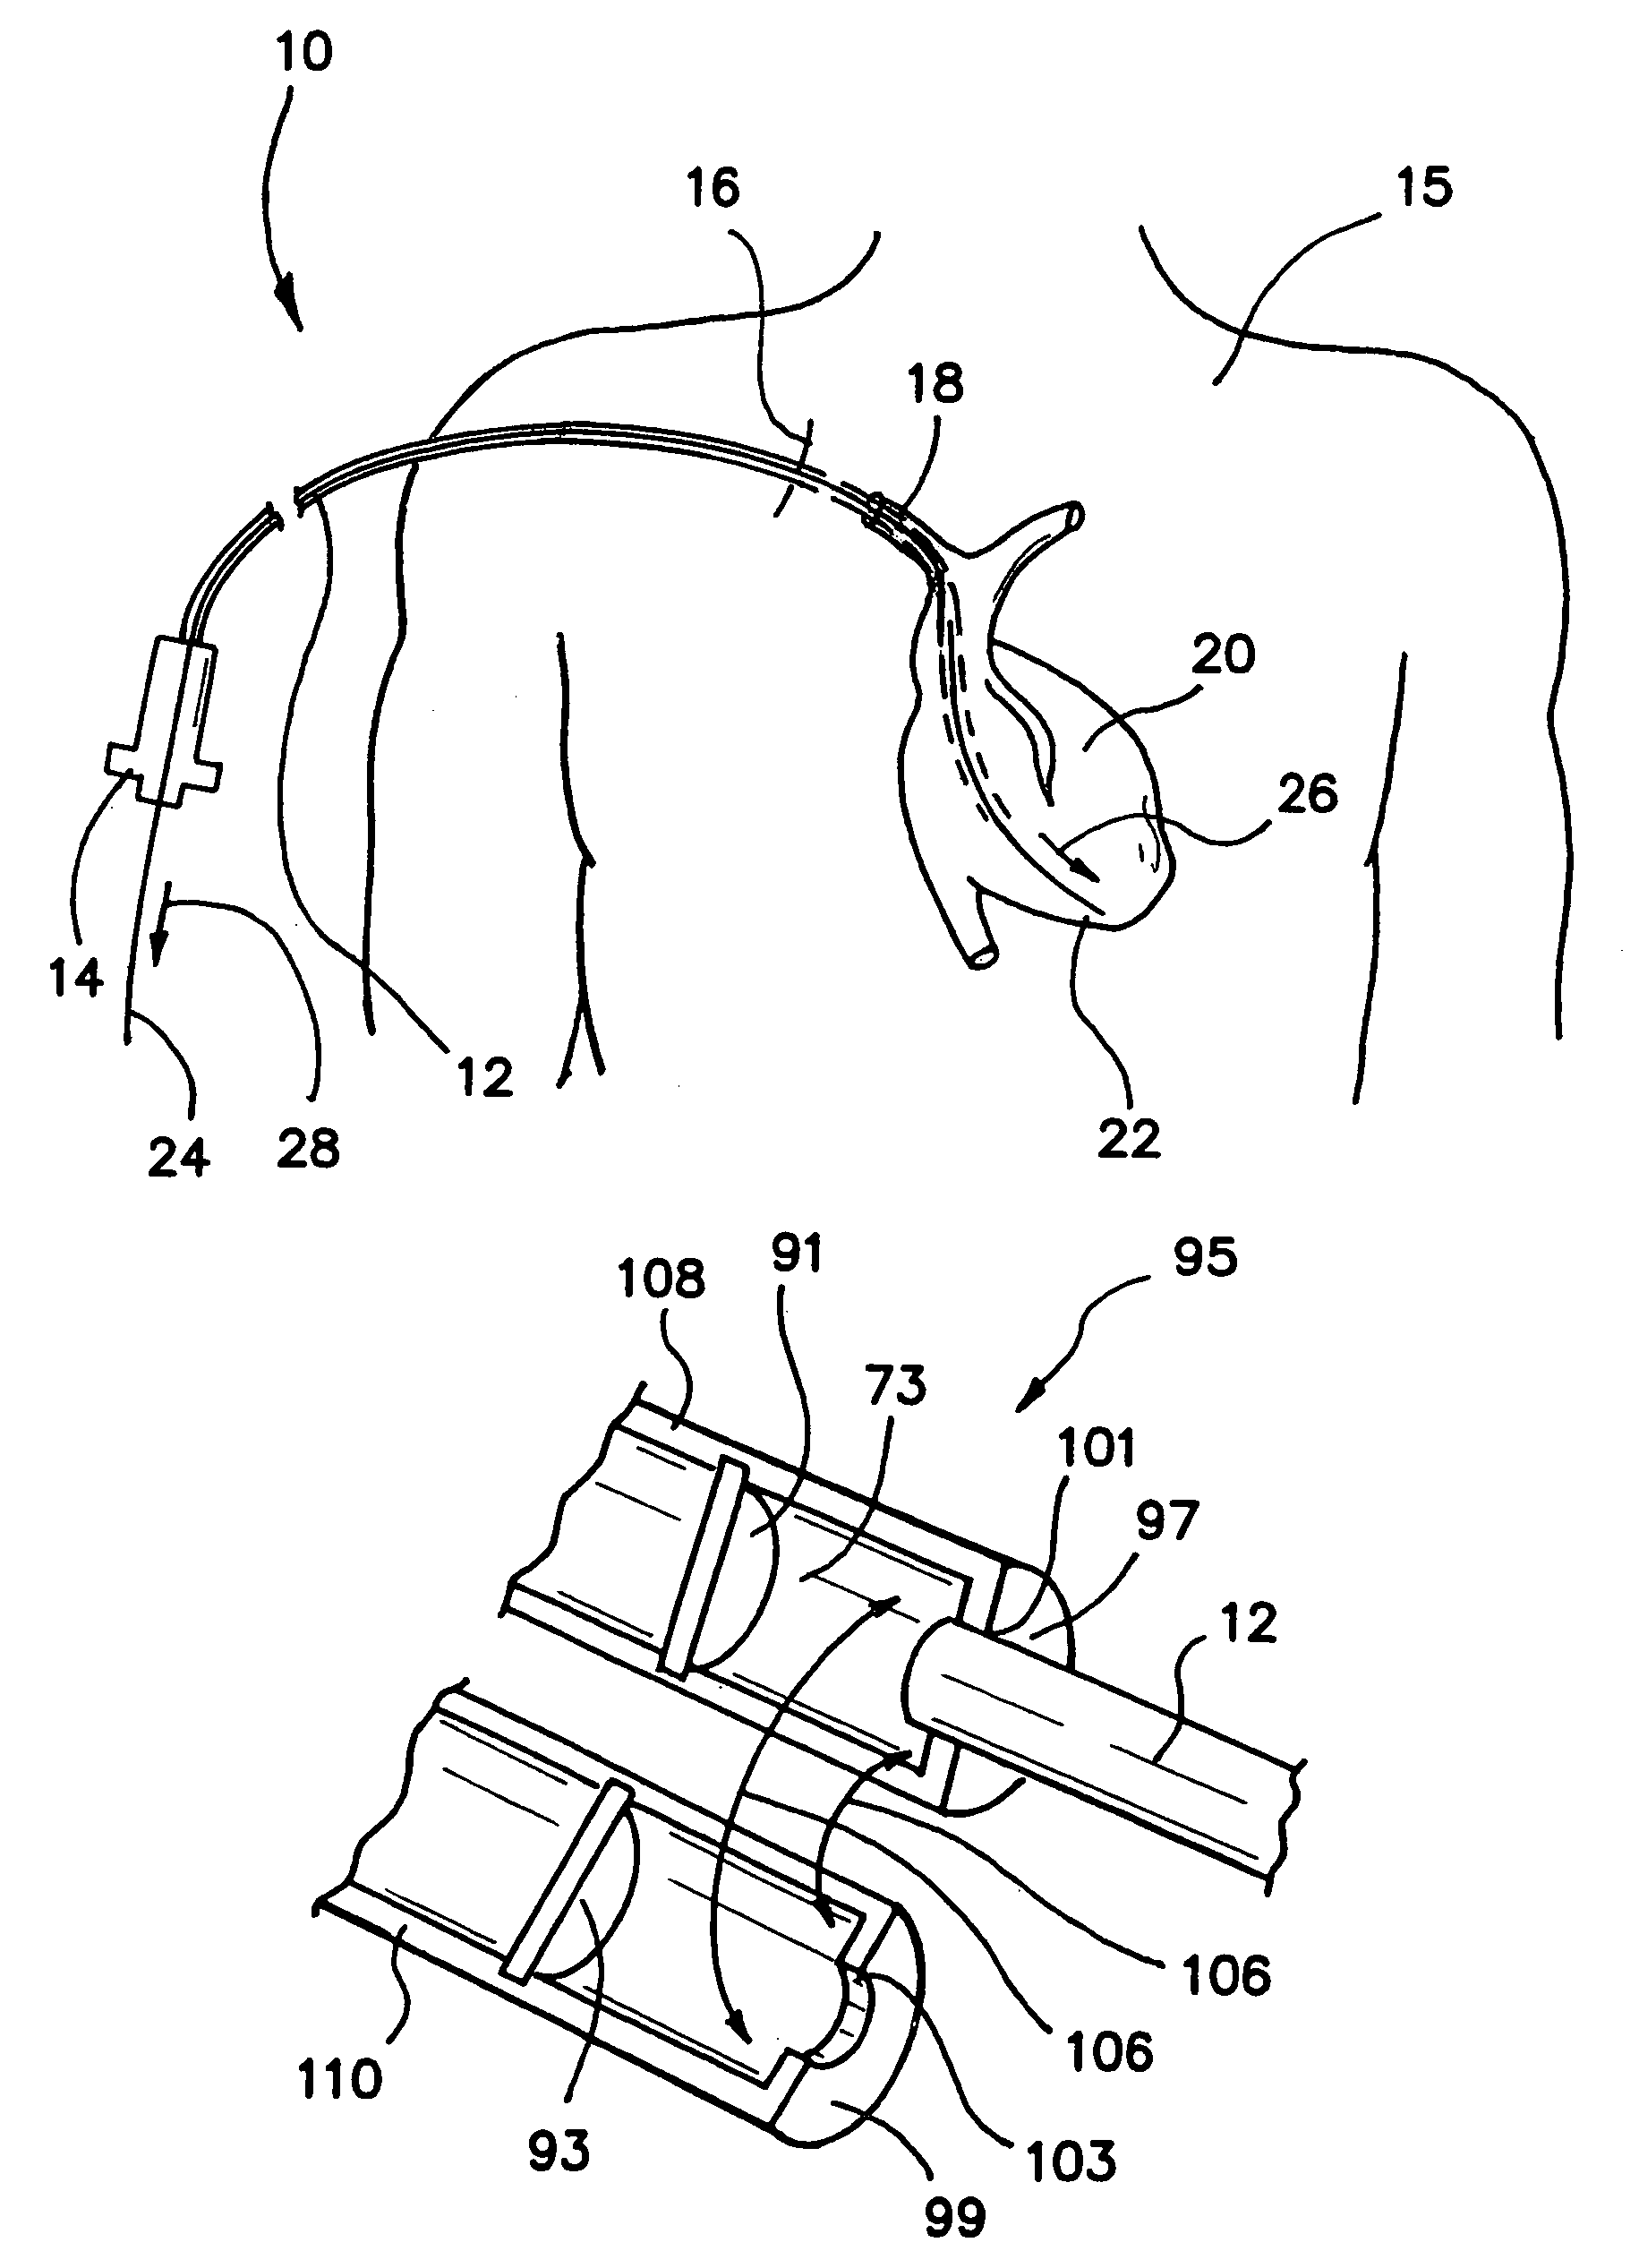 Introducer and hemostatic valve combination and method of using the same